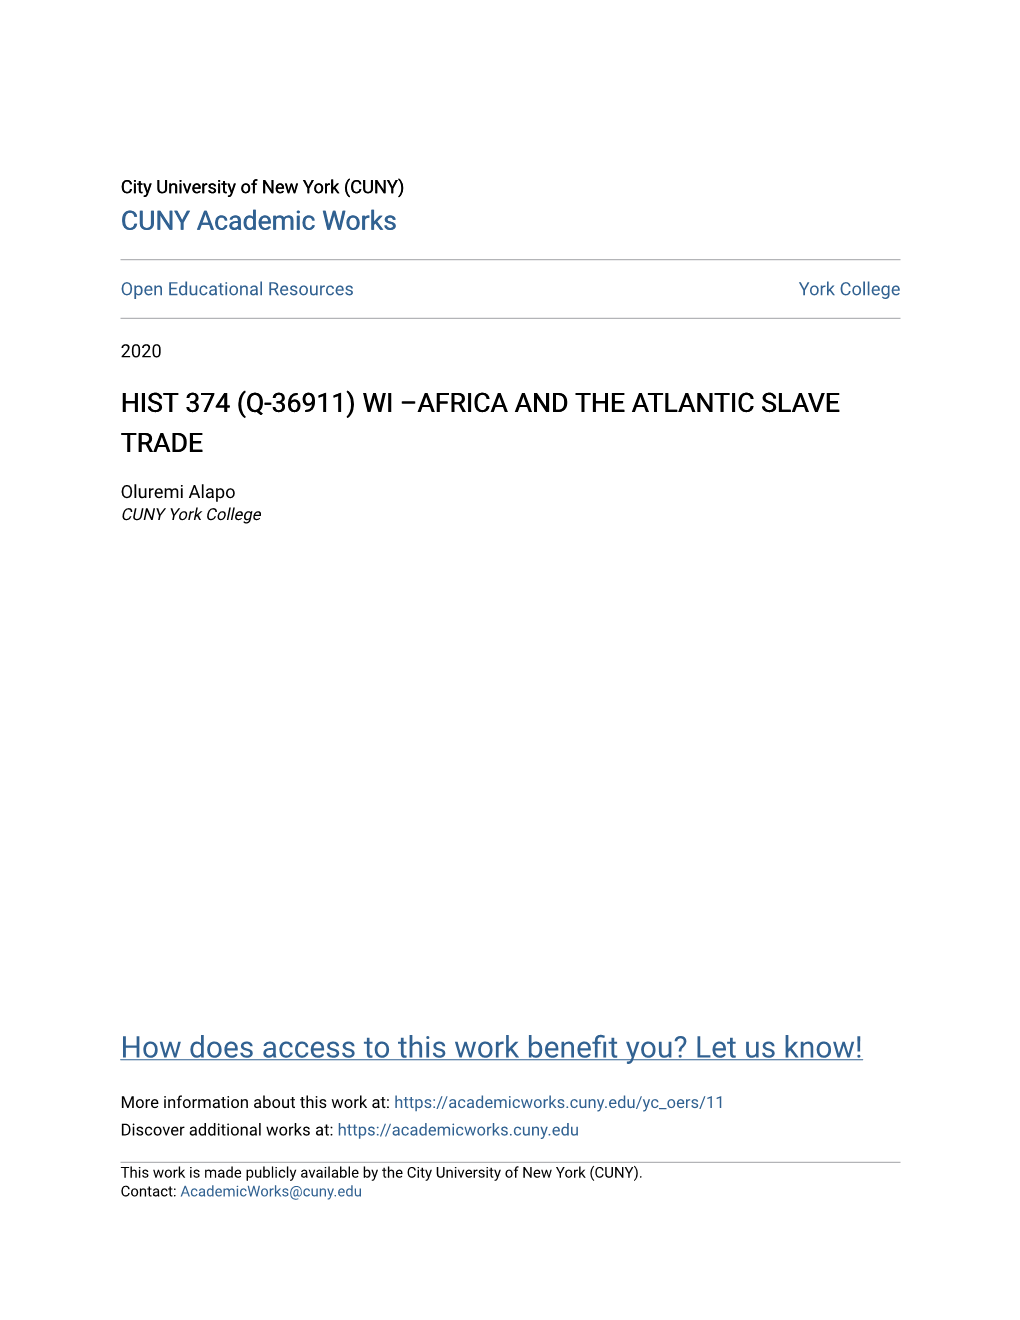 WI Â•Fiafrica and the ATLANTIC SLAVE TRADE